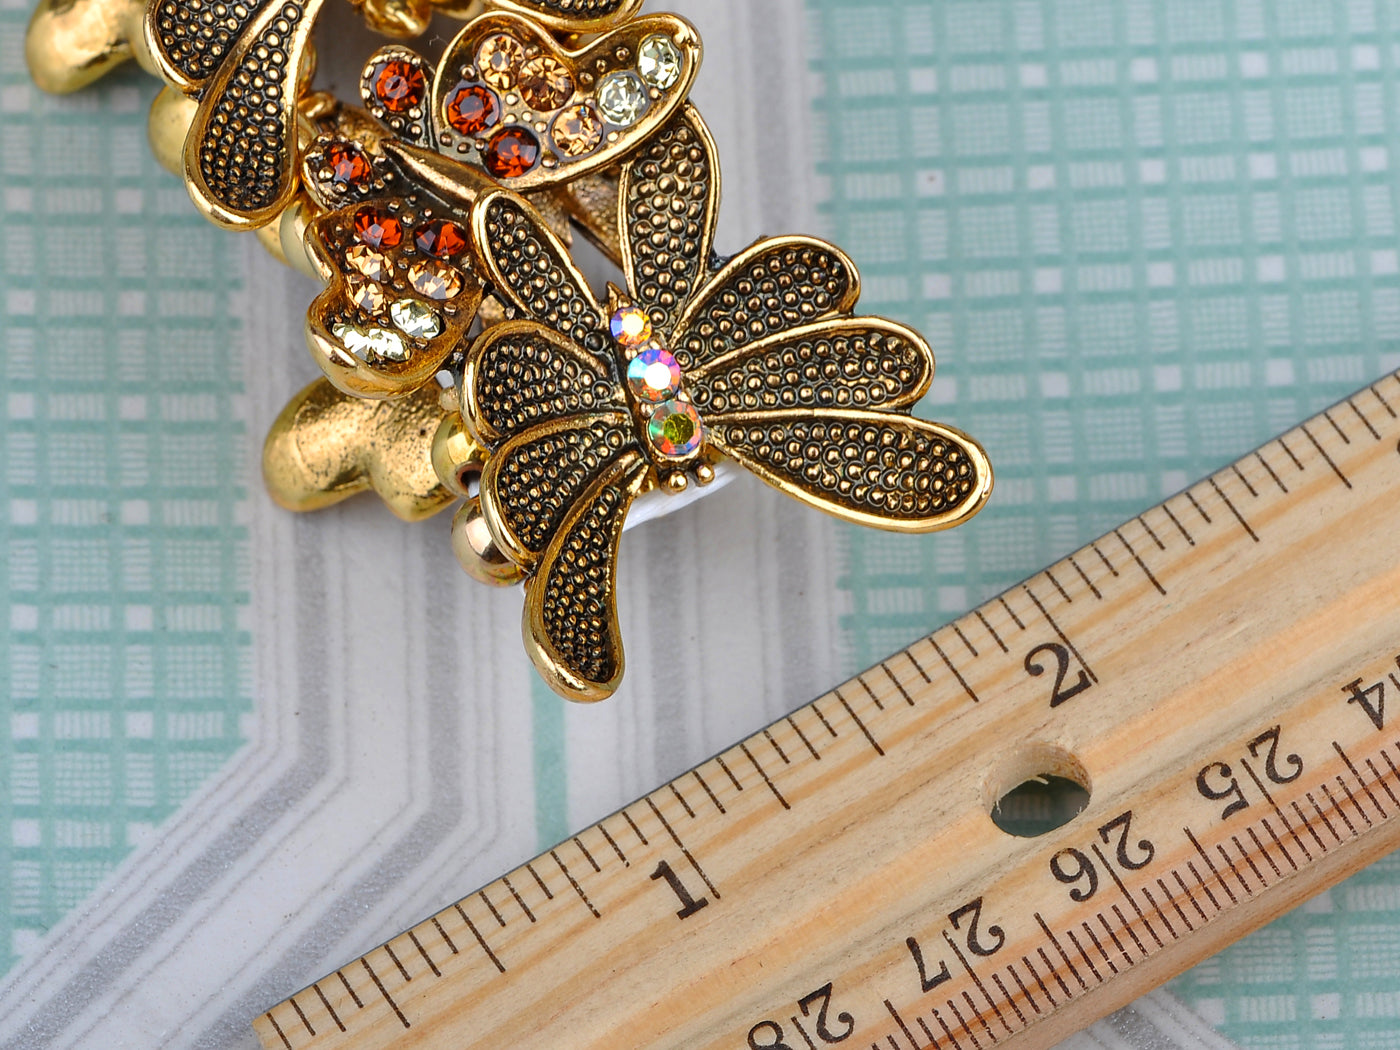 Light Siam Butterfly Insect Bracelet Bangle Cuff